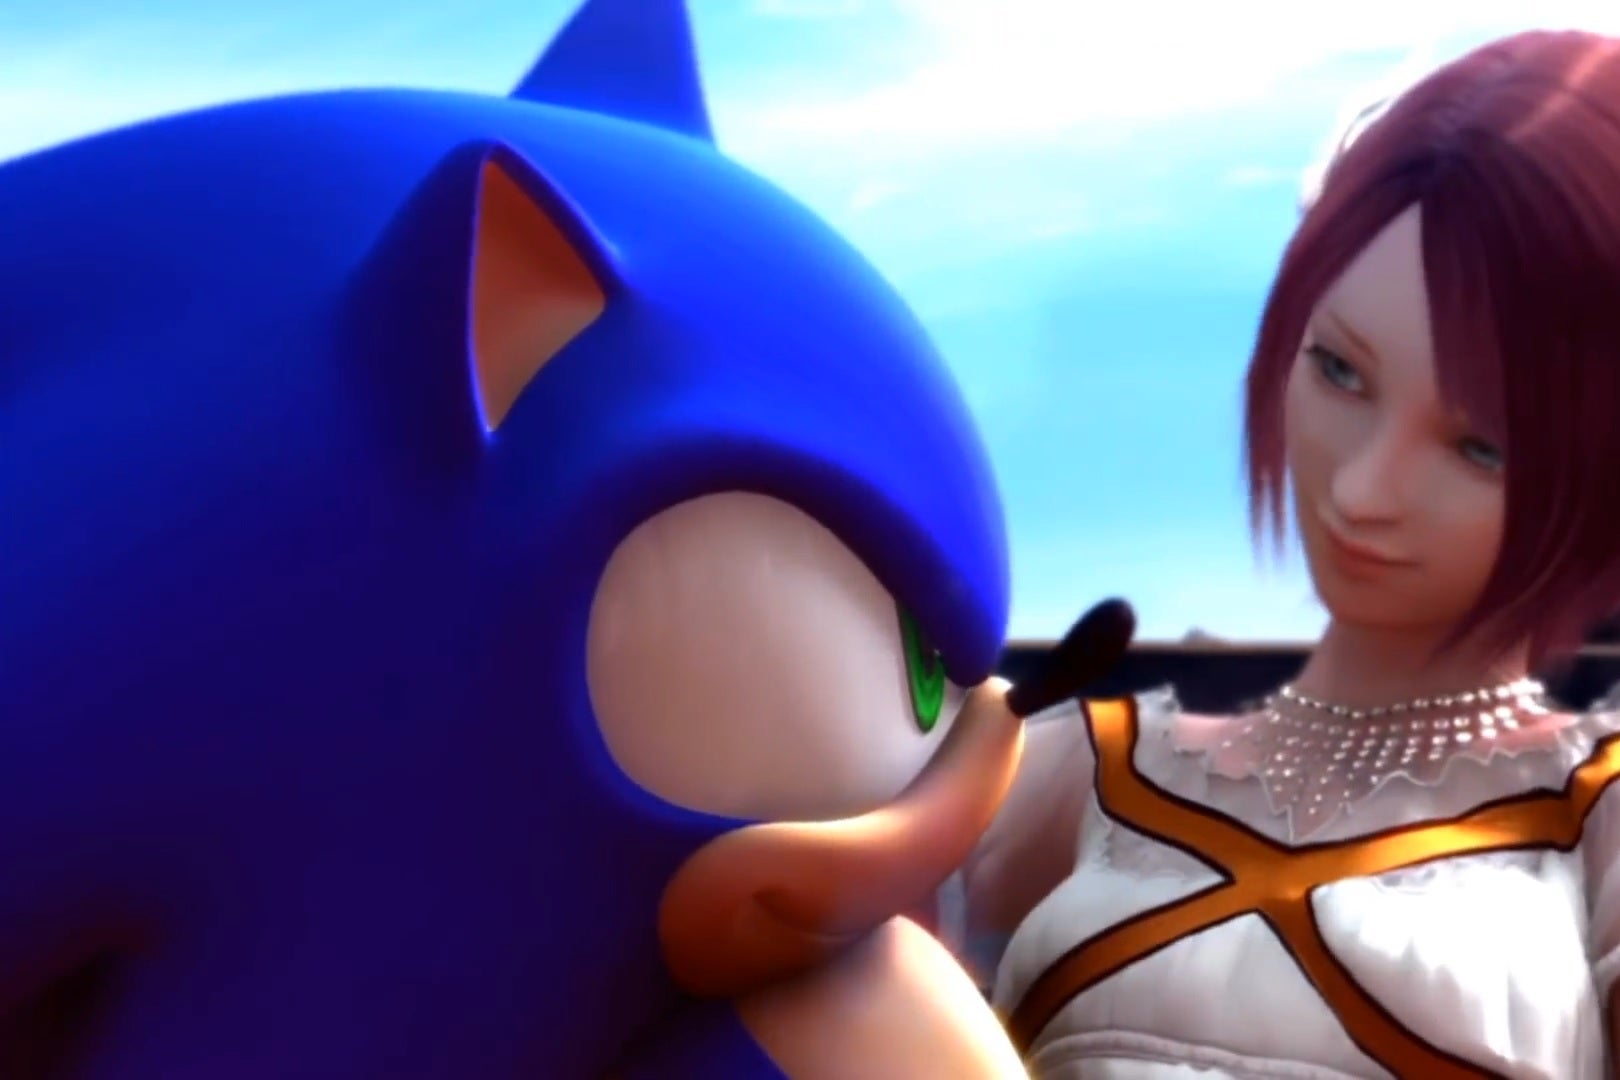 A blue cartoon hedgehog holds a woman in a white dress with short brown hair. 